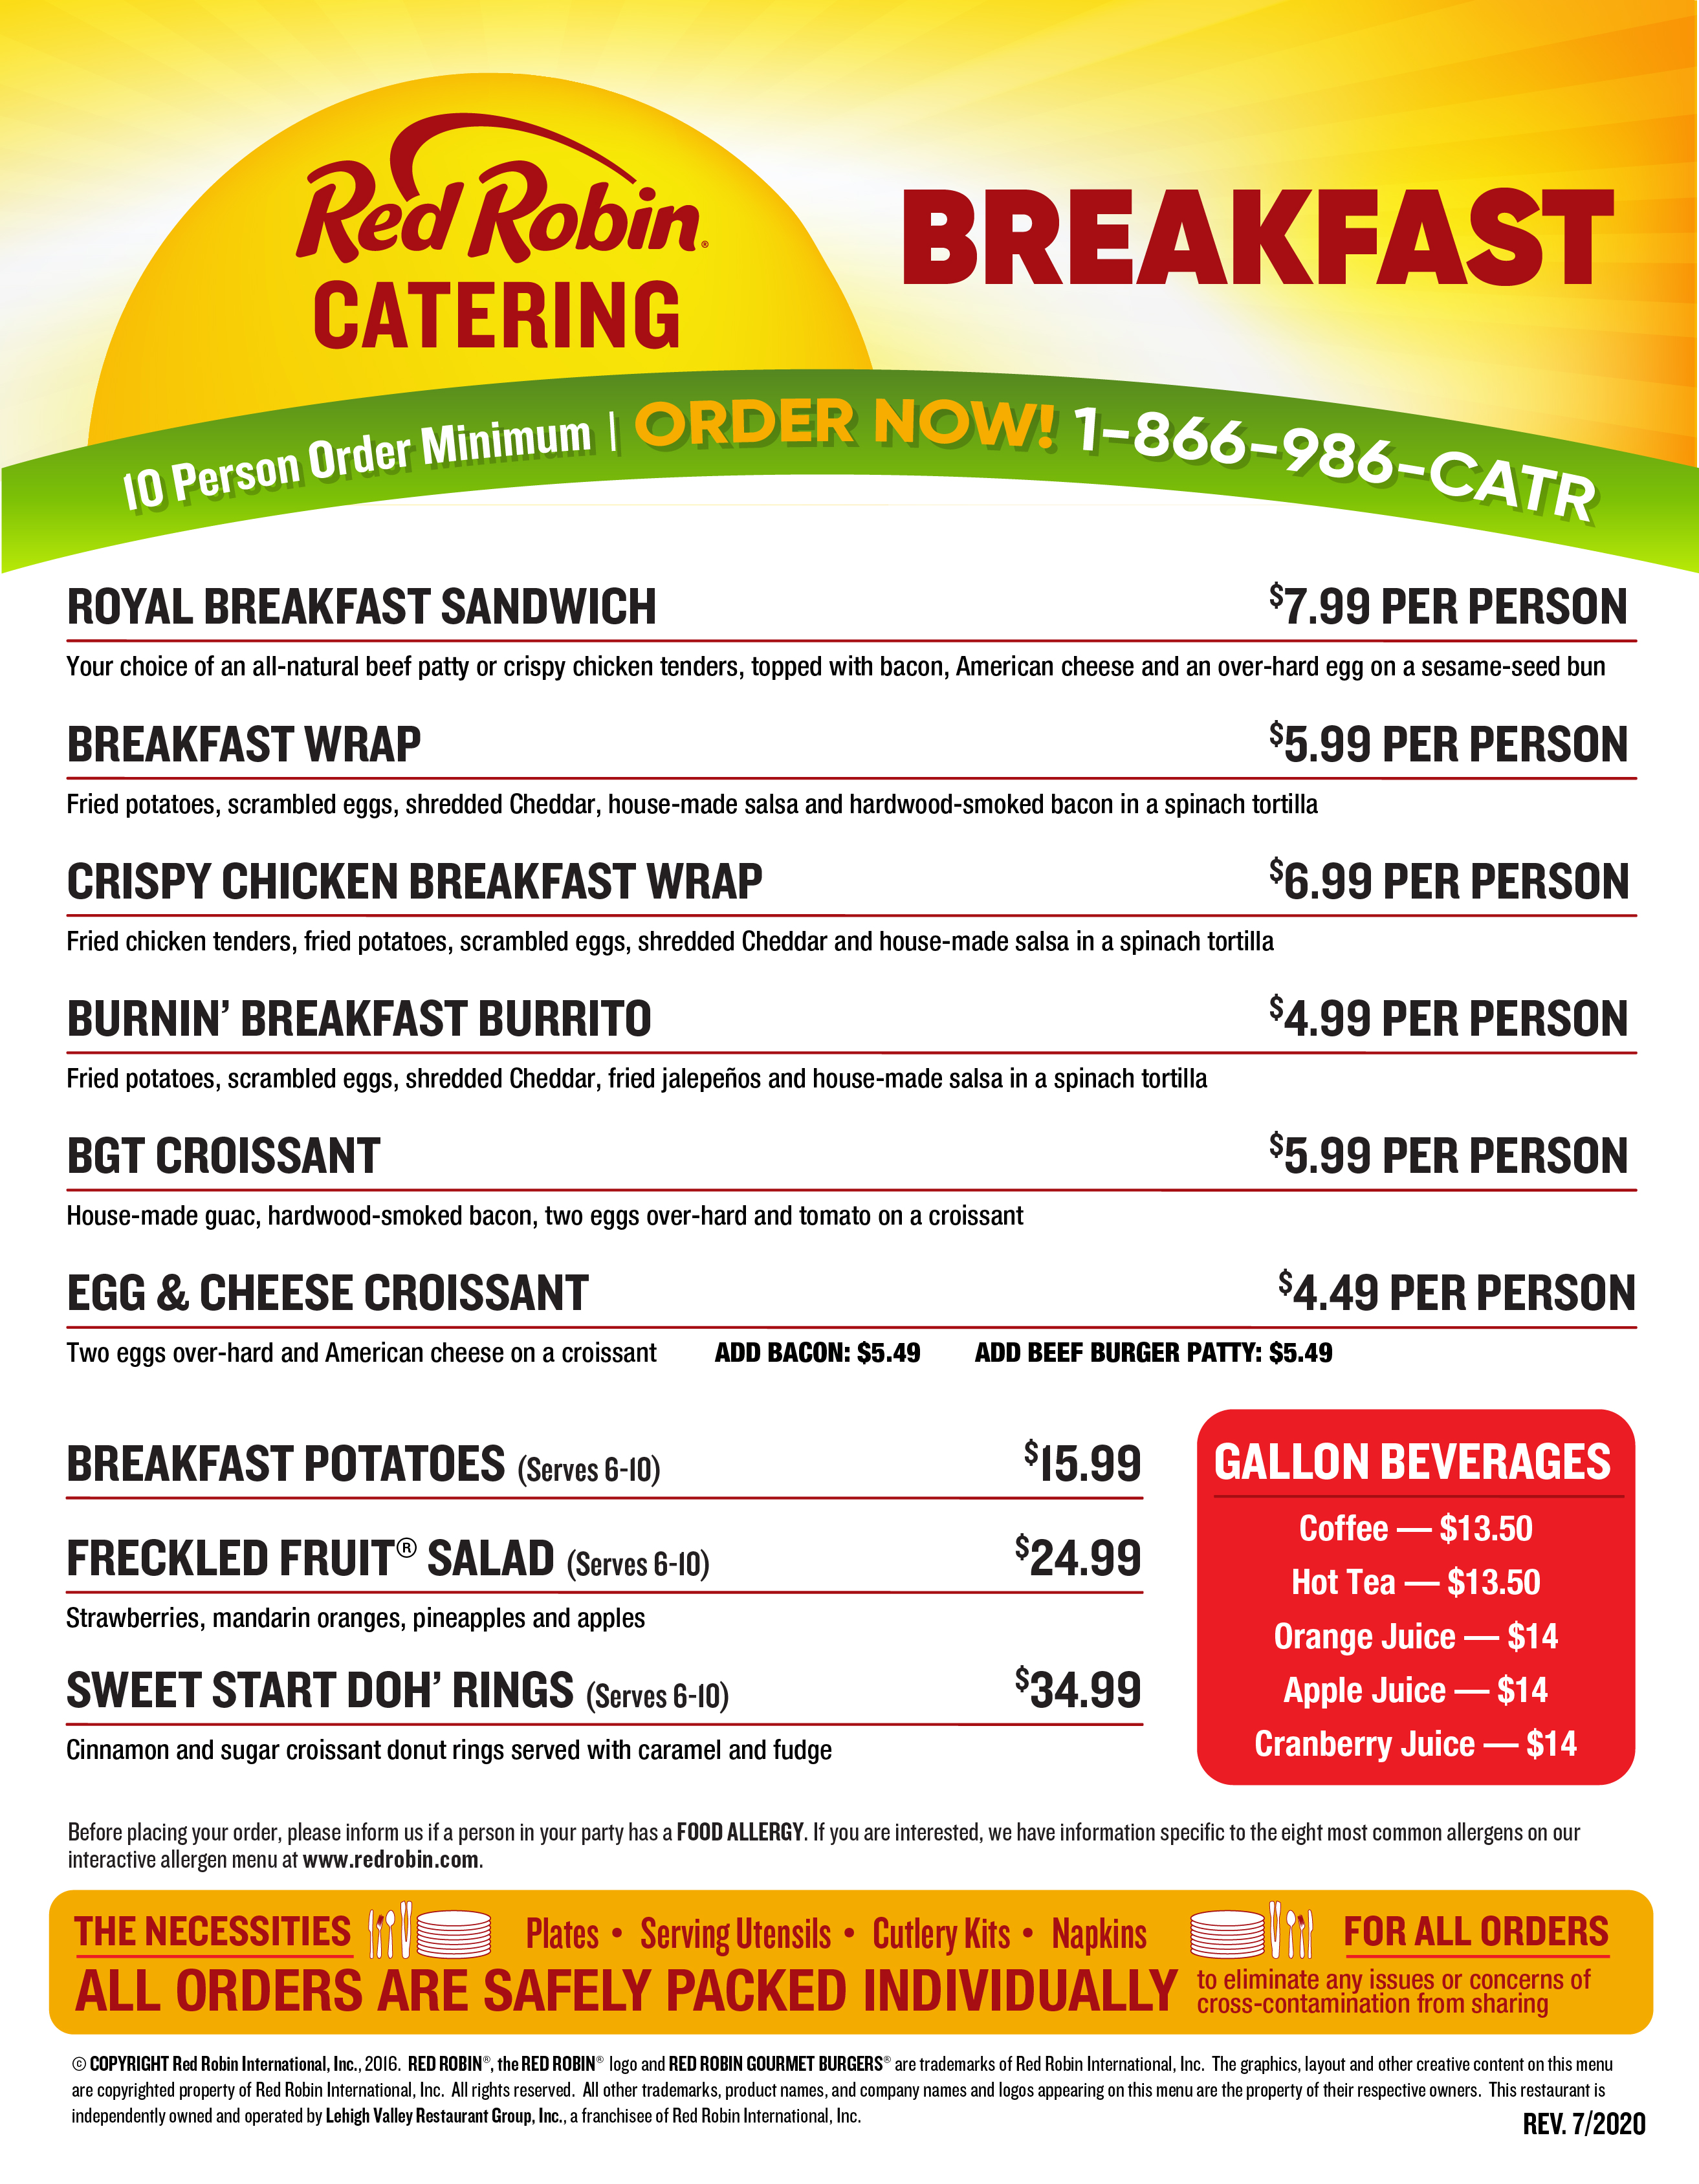 New Red Robin Breakfast Catering Menu. Now you can have the YUMMM before lunch!